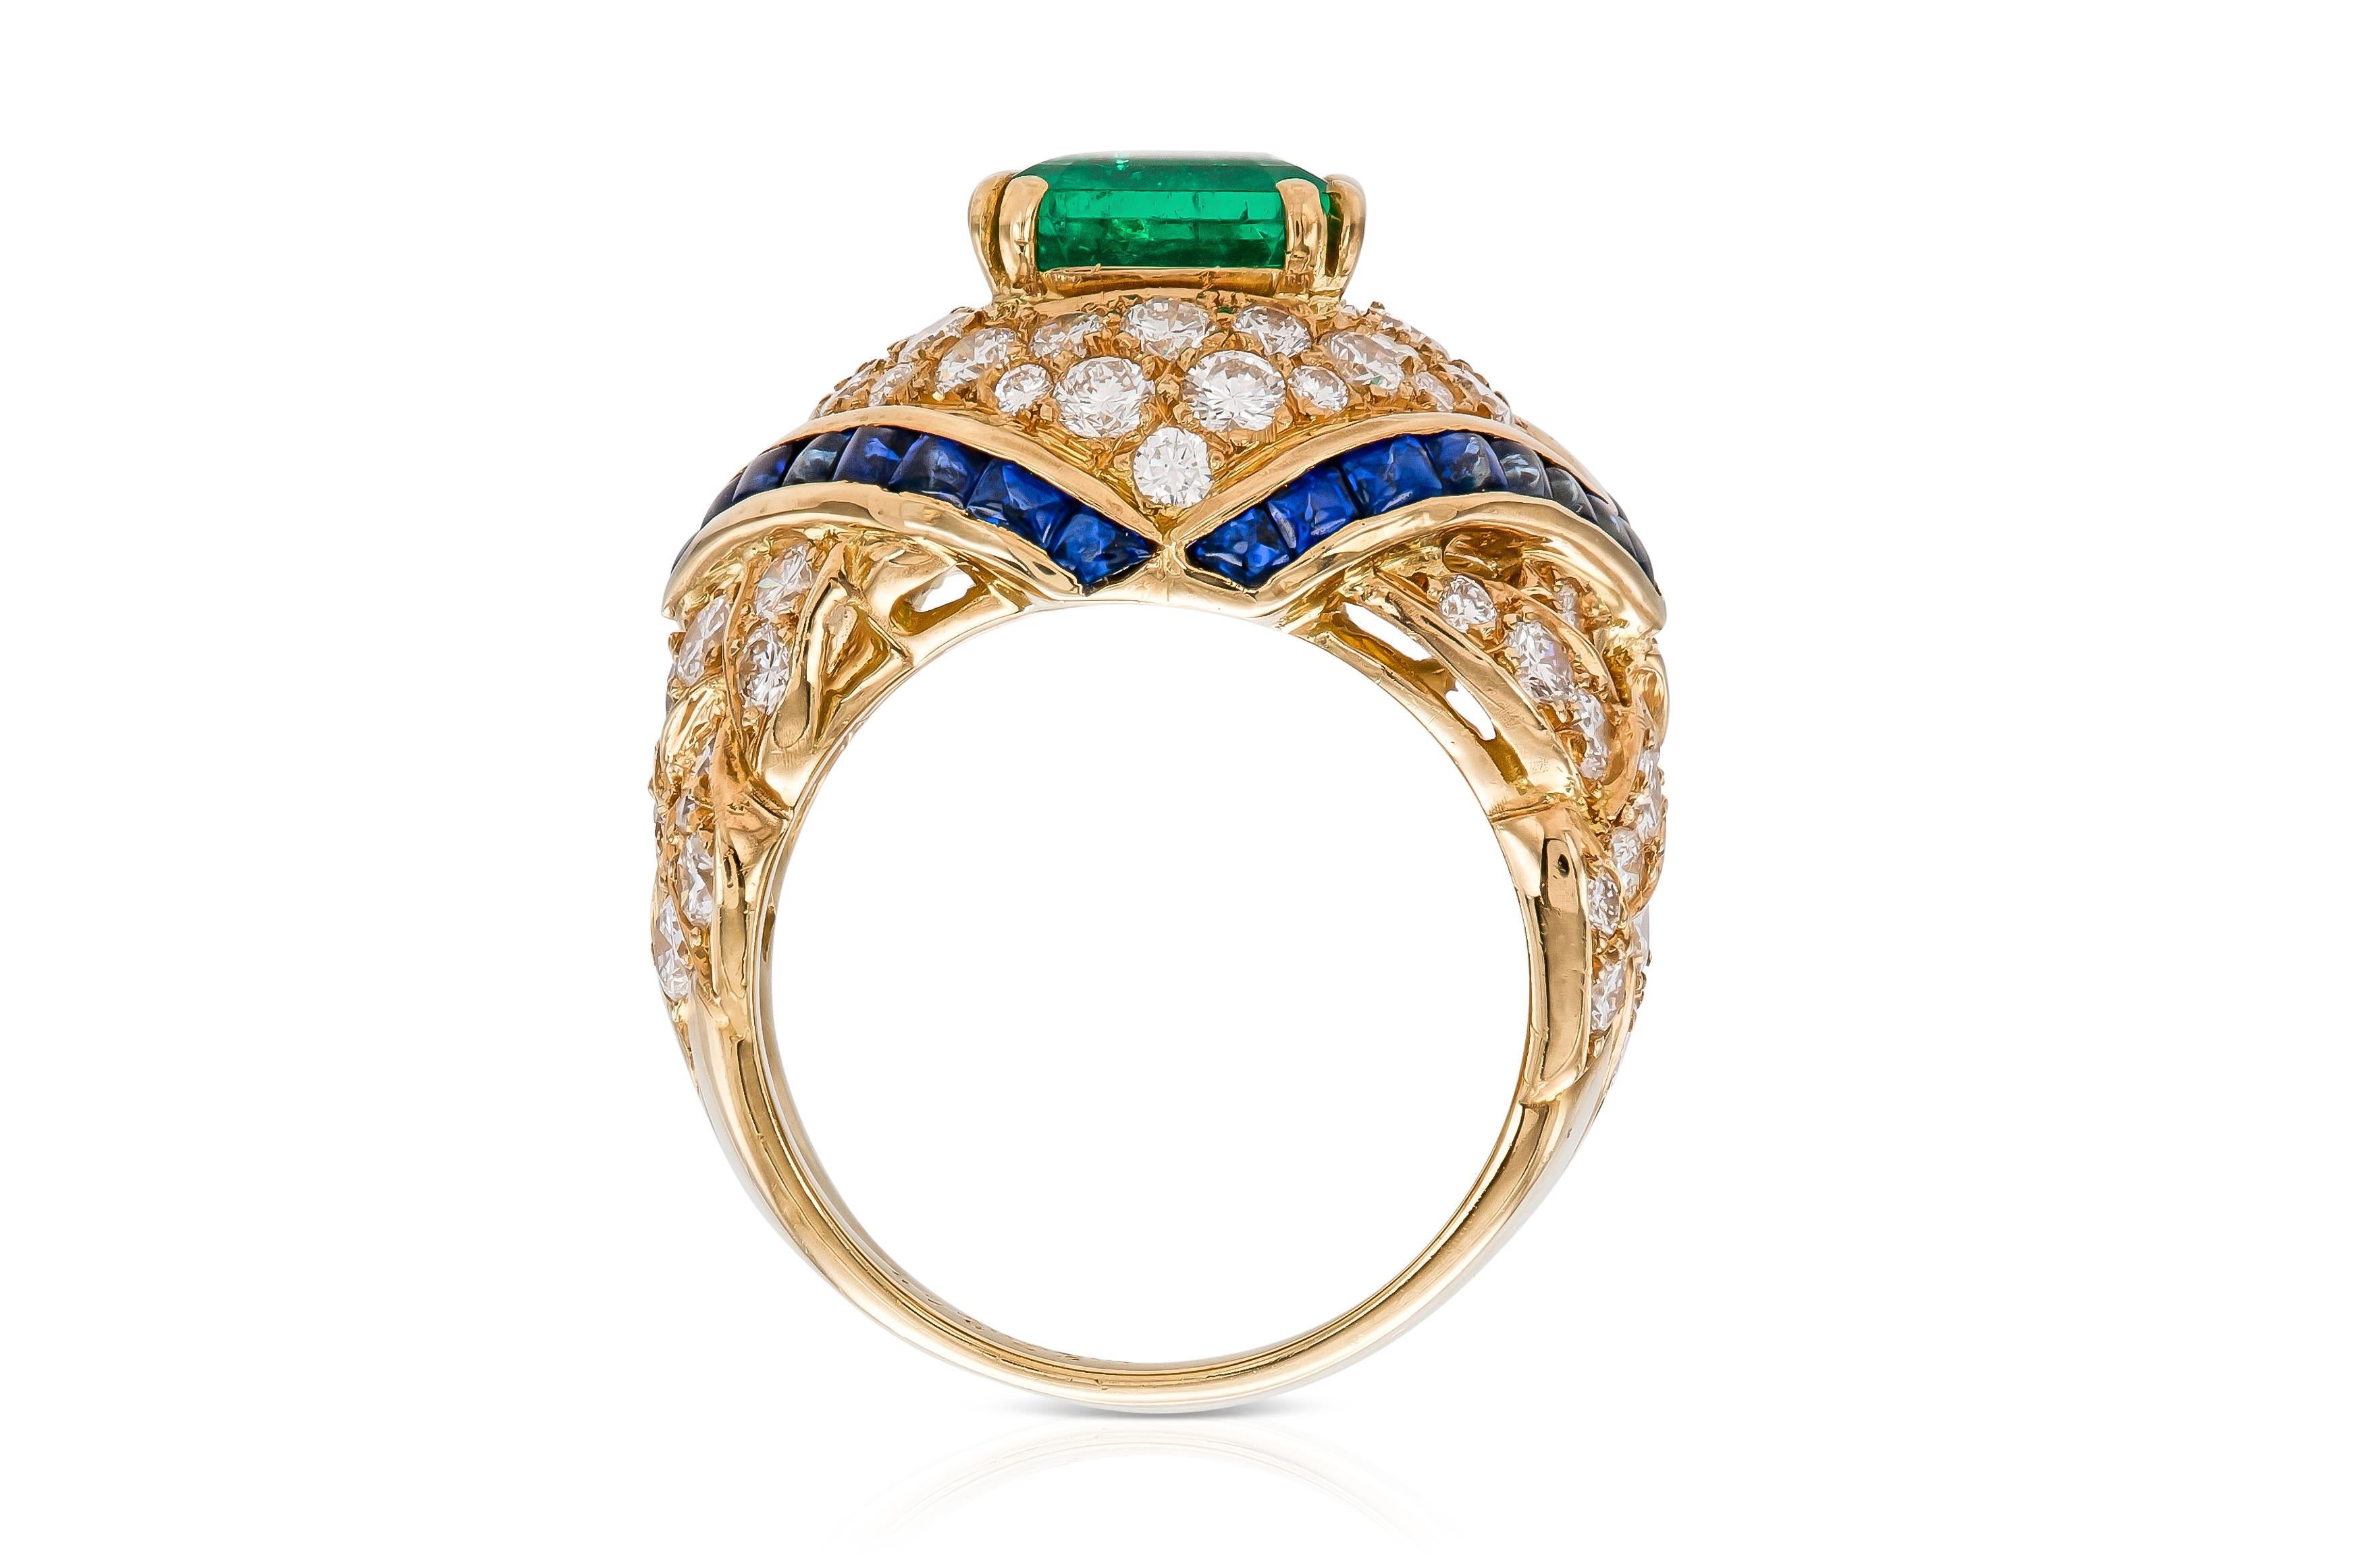 Vintage 1980s Mauboussin Emerald Ring with Diamonds and Sapphires In Good Condition For Sale In New York, NY